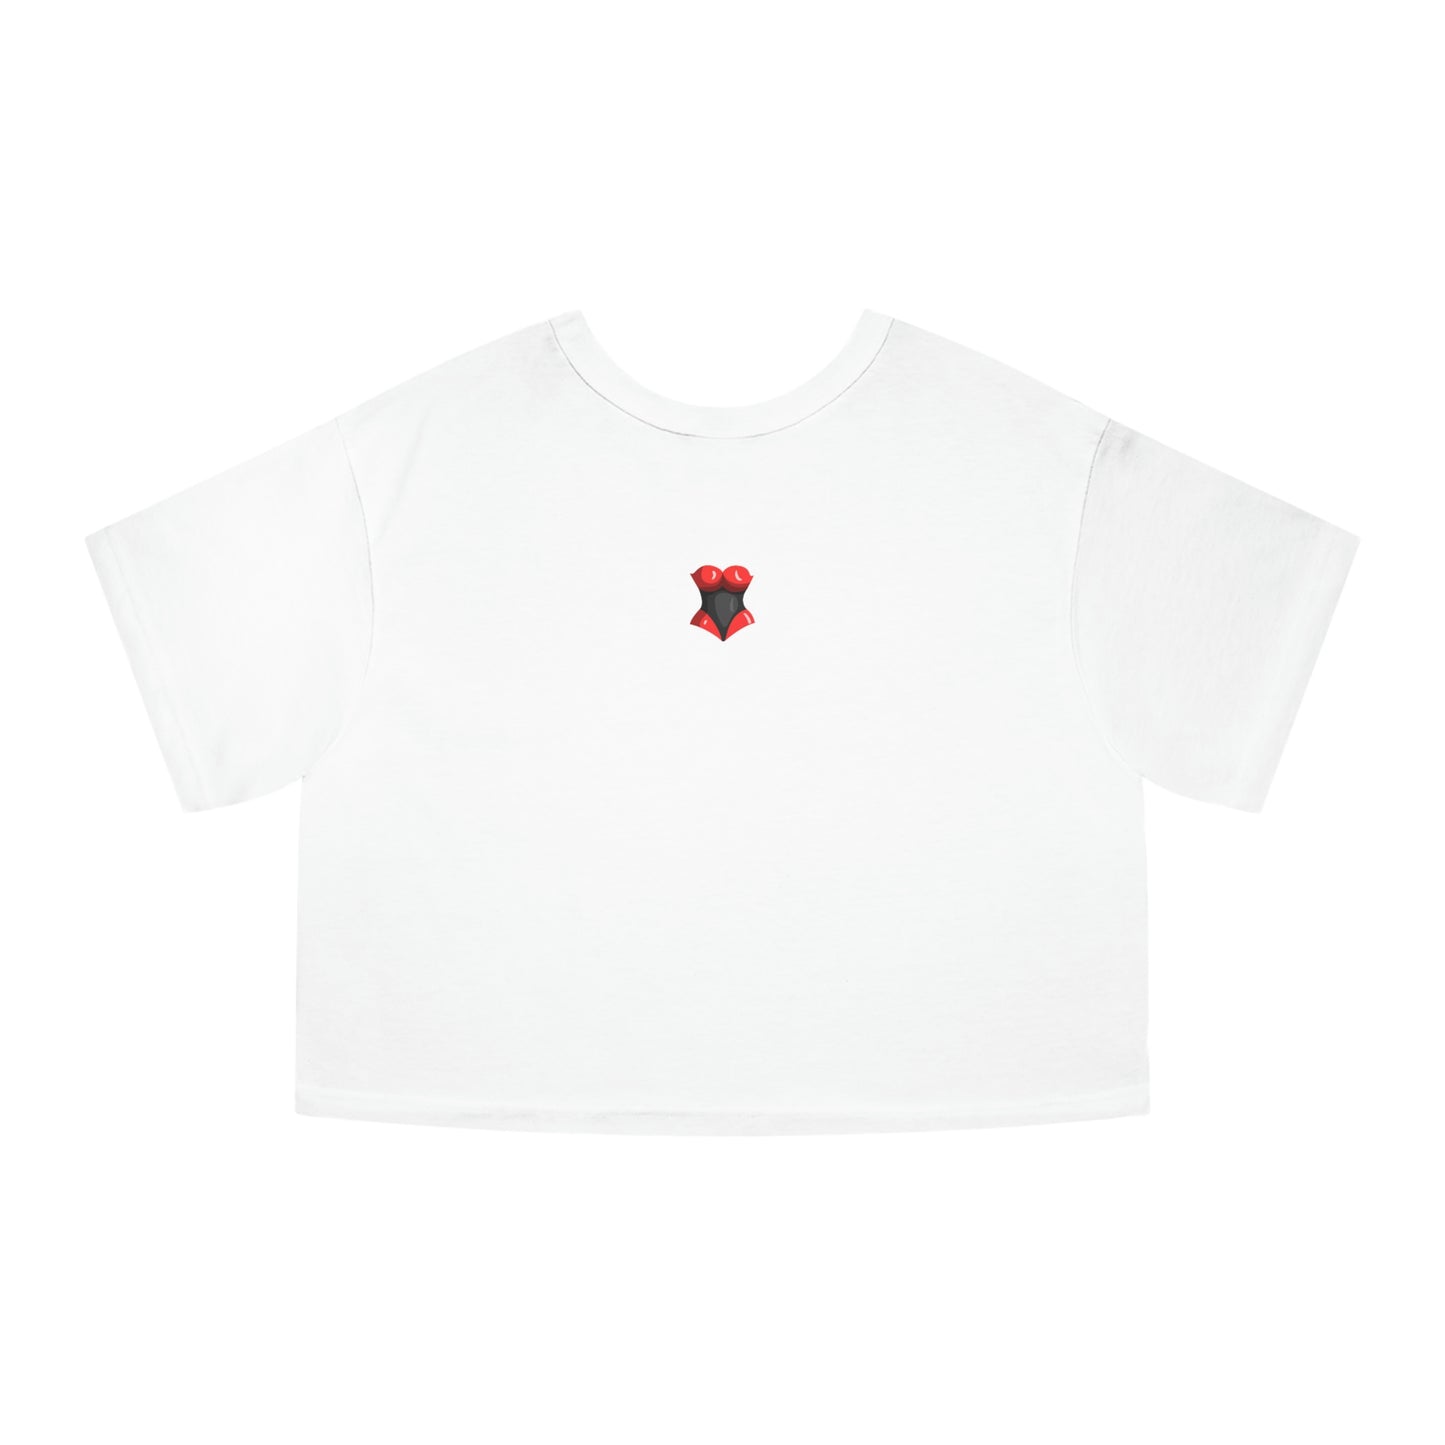 The Ethics | Champion Cropped T-Shirt